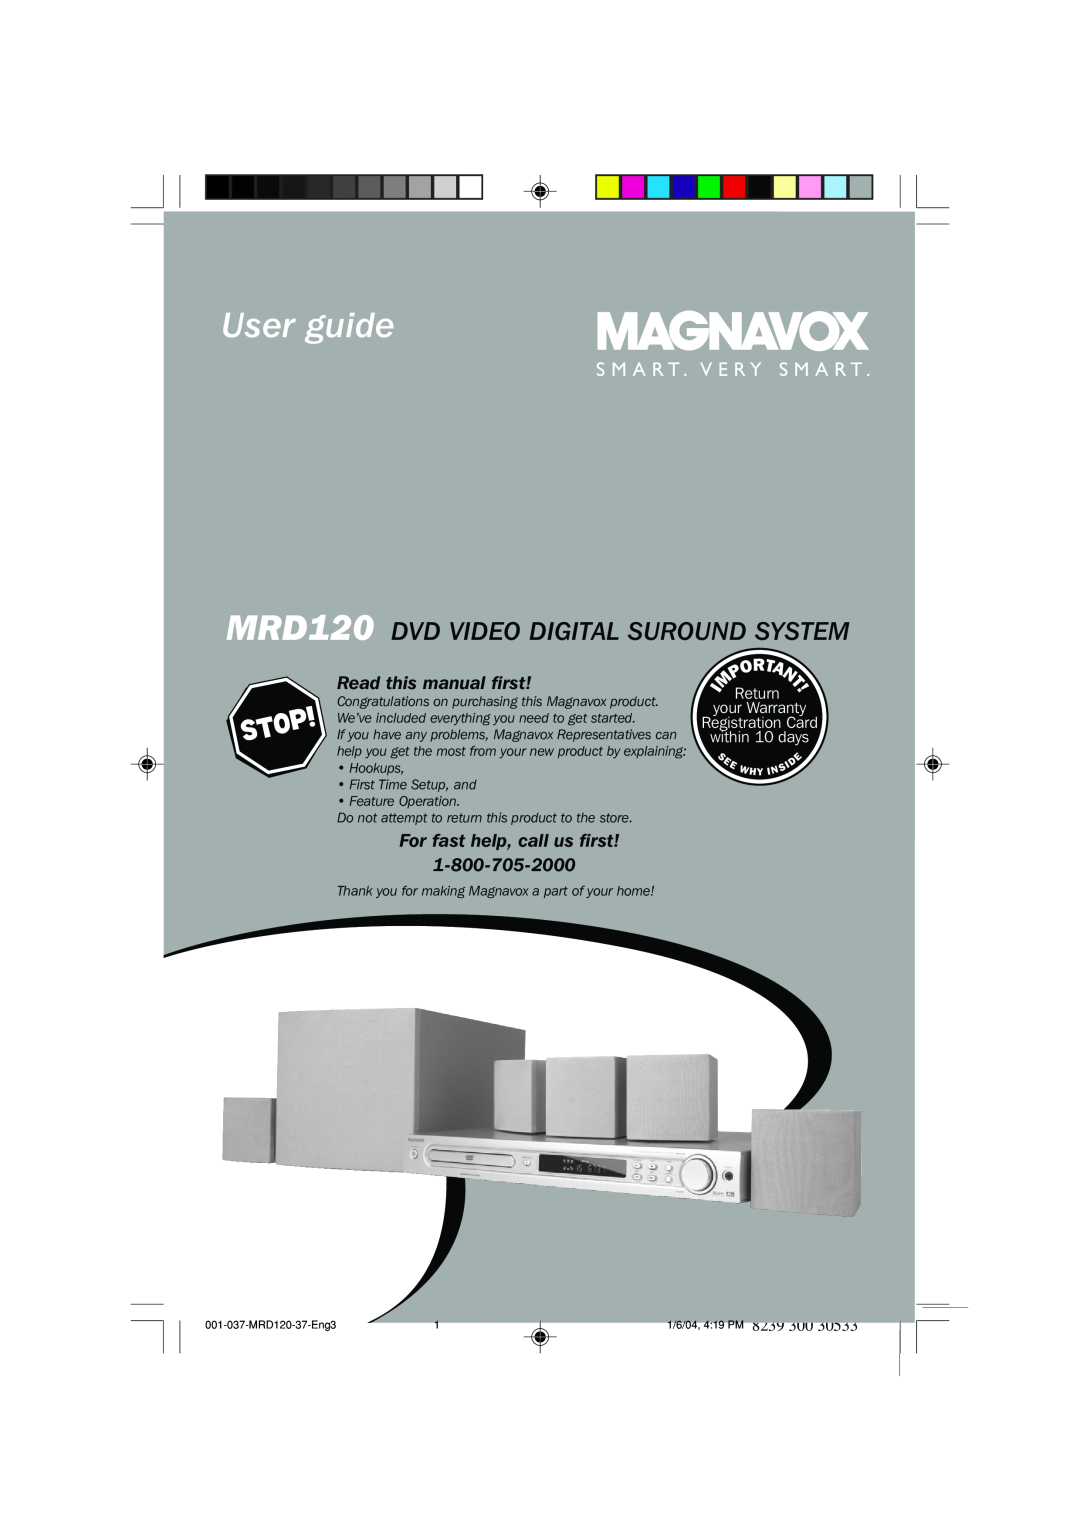 Magnavox MRD120 warranty Read this manual ﬁrst, For fast help, call us ﬁrst, User guide, S M A R T . V E R Y S M A R T 